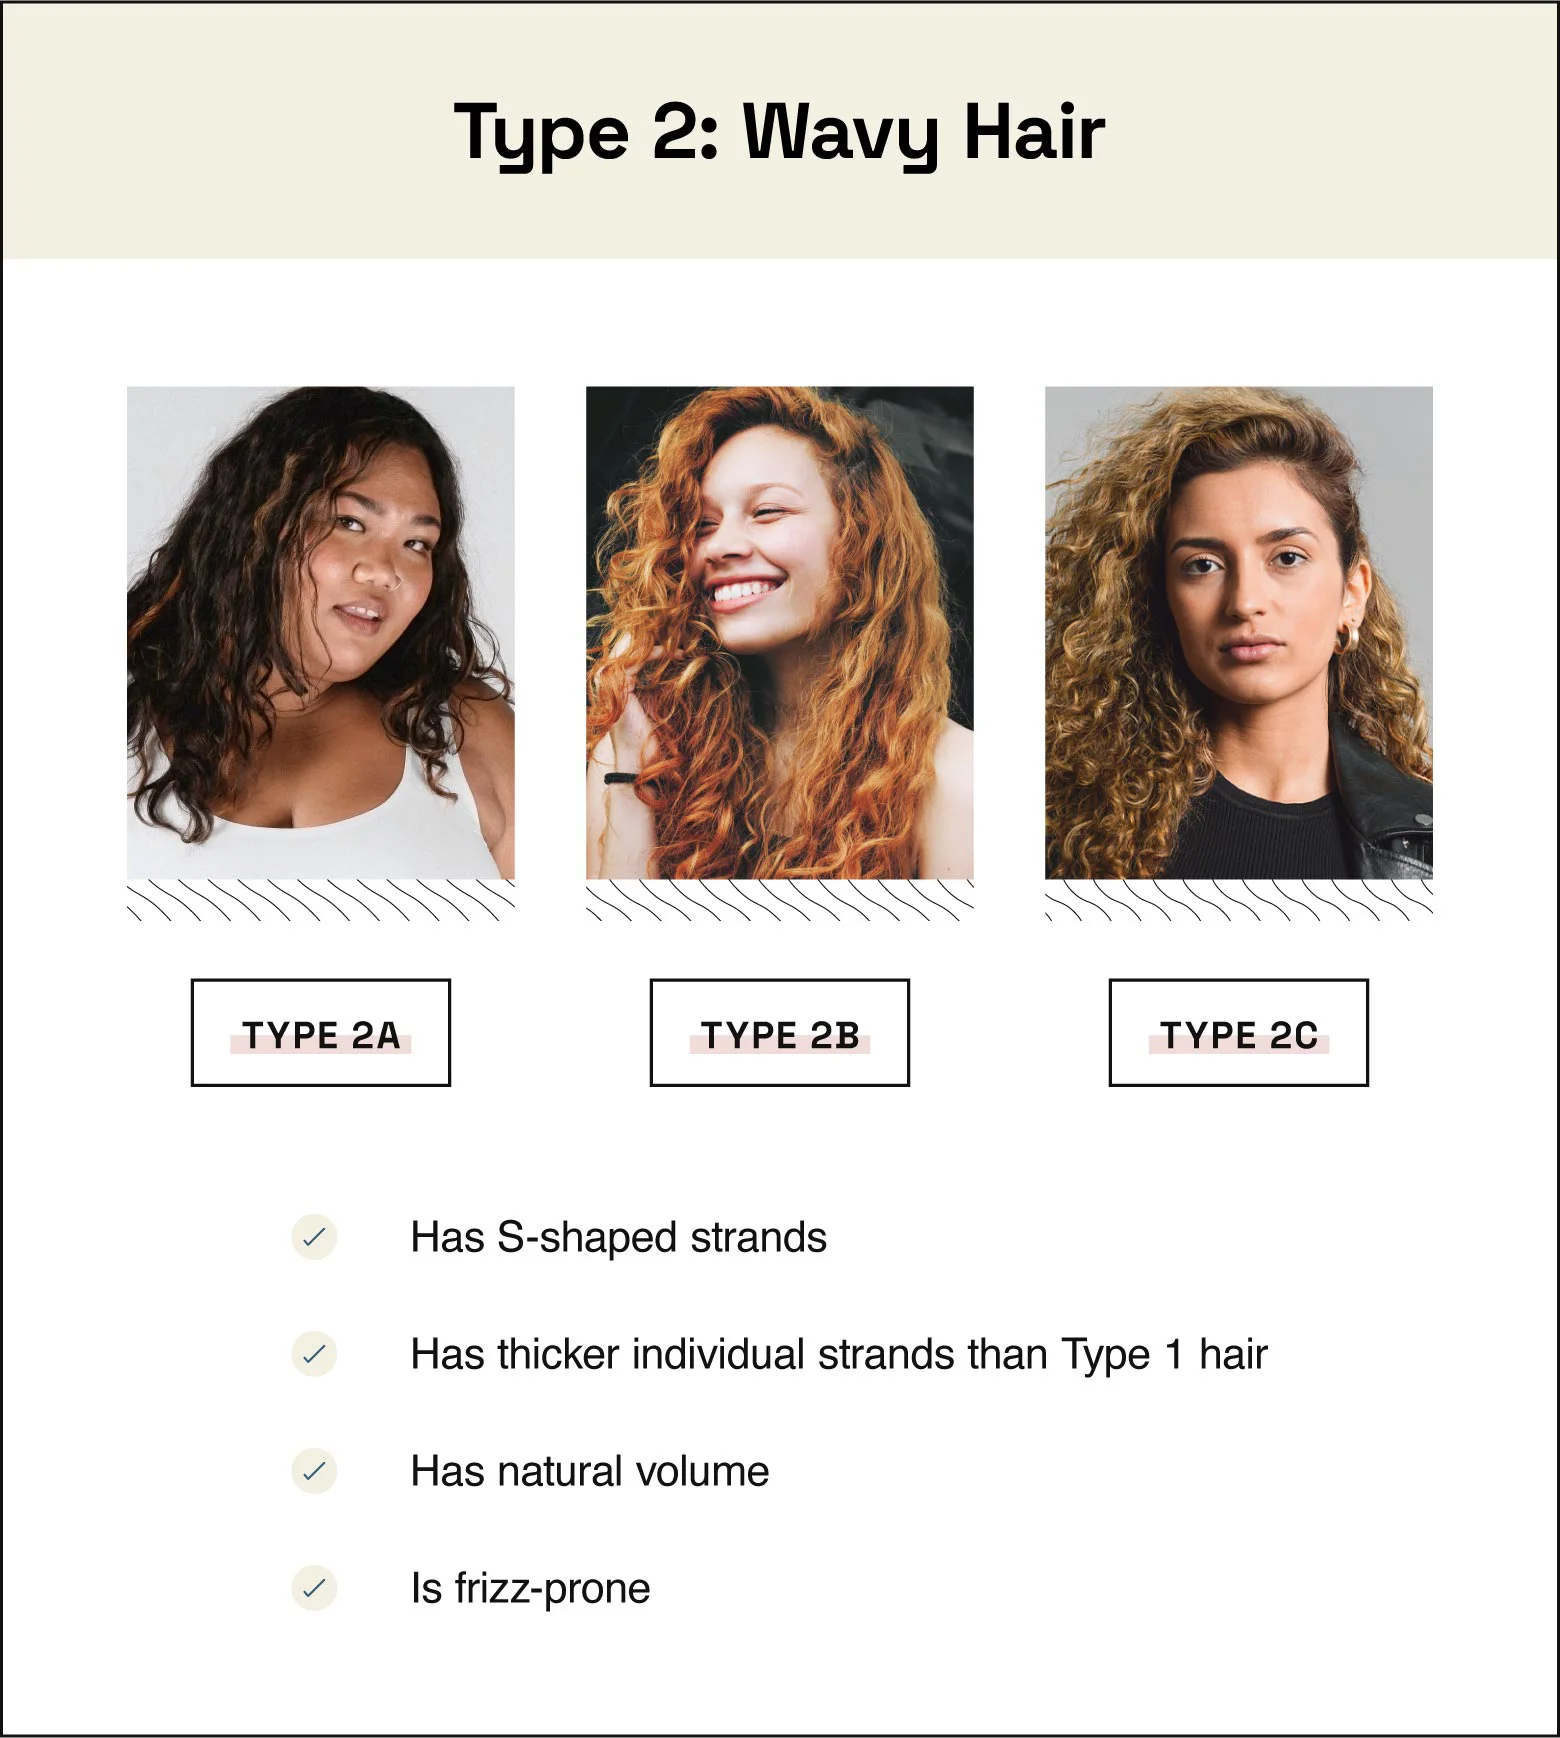 Type 2 hair is wavy, has s-shaped strands, has individual strands that are thicker than Type 1 hair, has natural volume, and is frizz-prone.